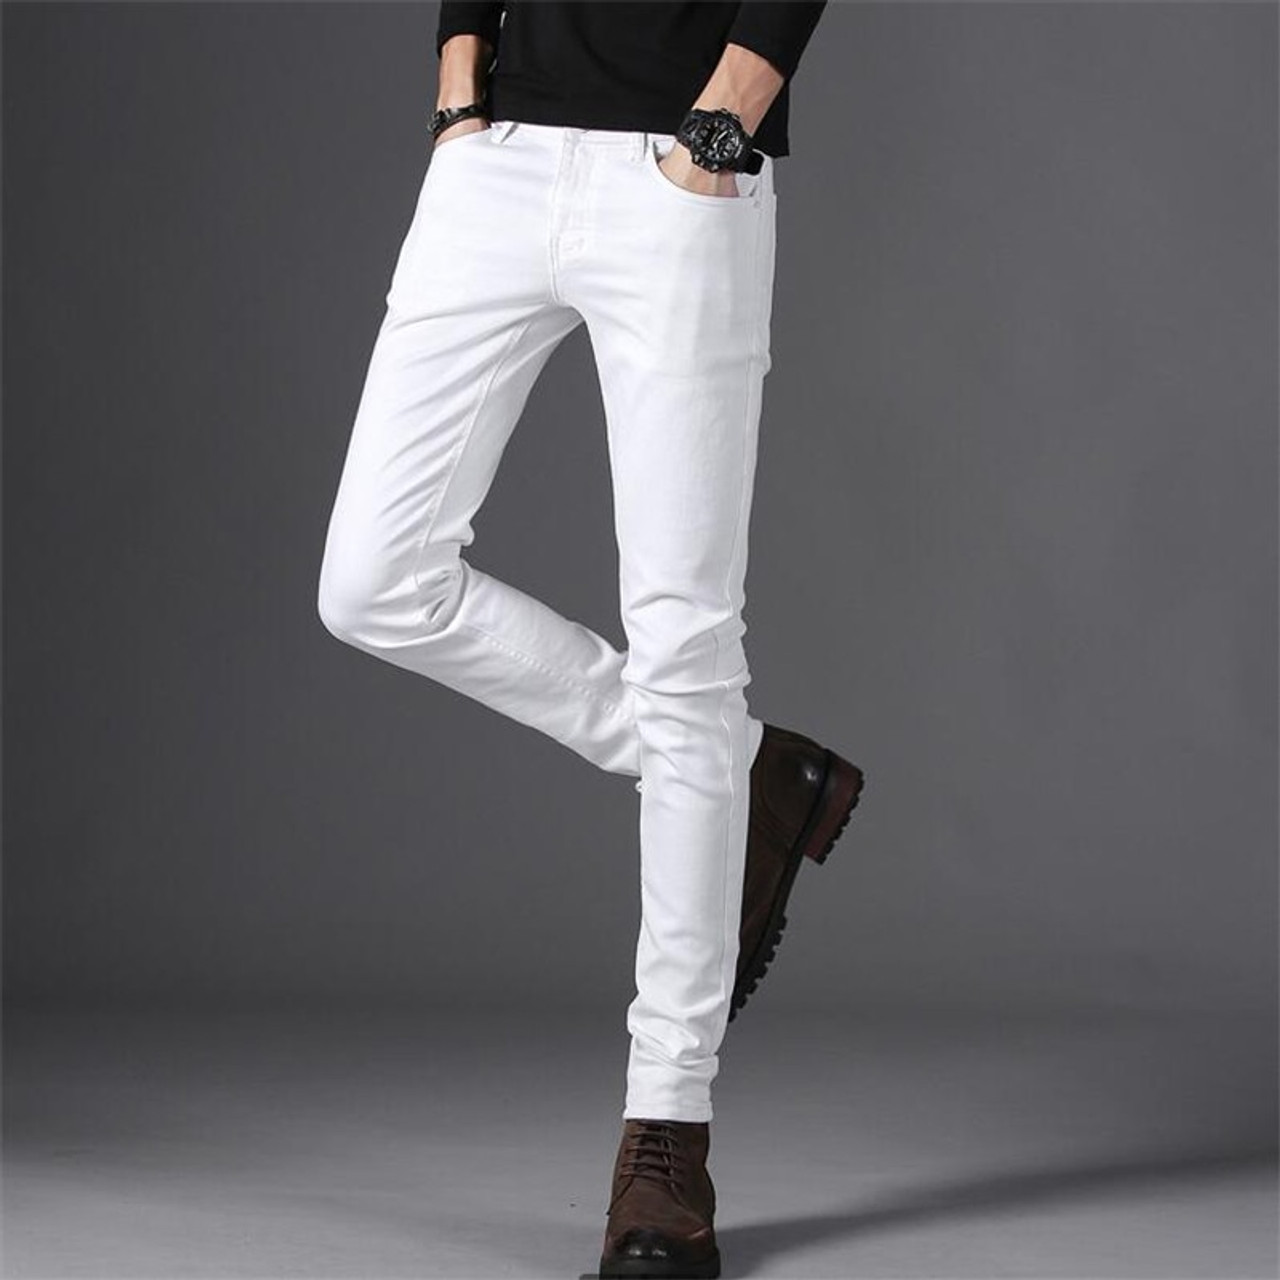 mens casual trousers